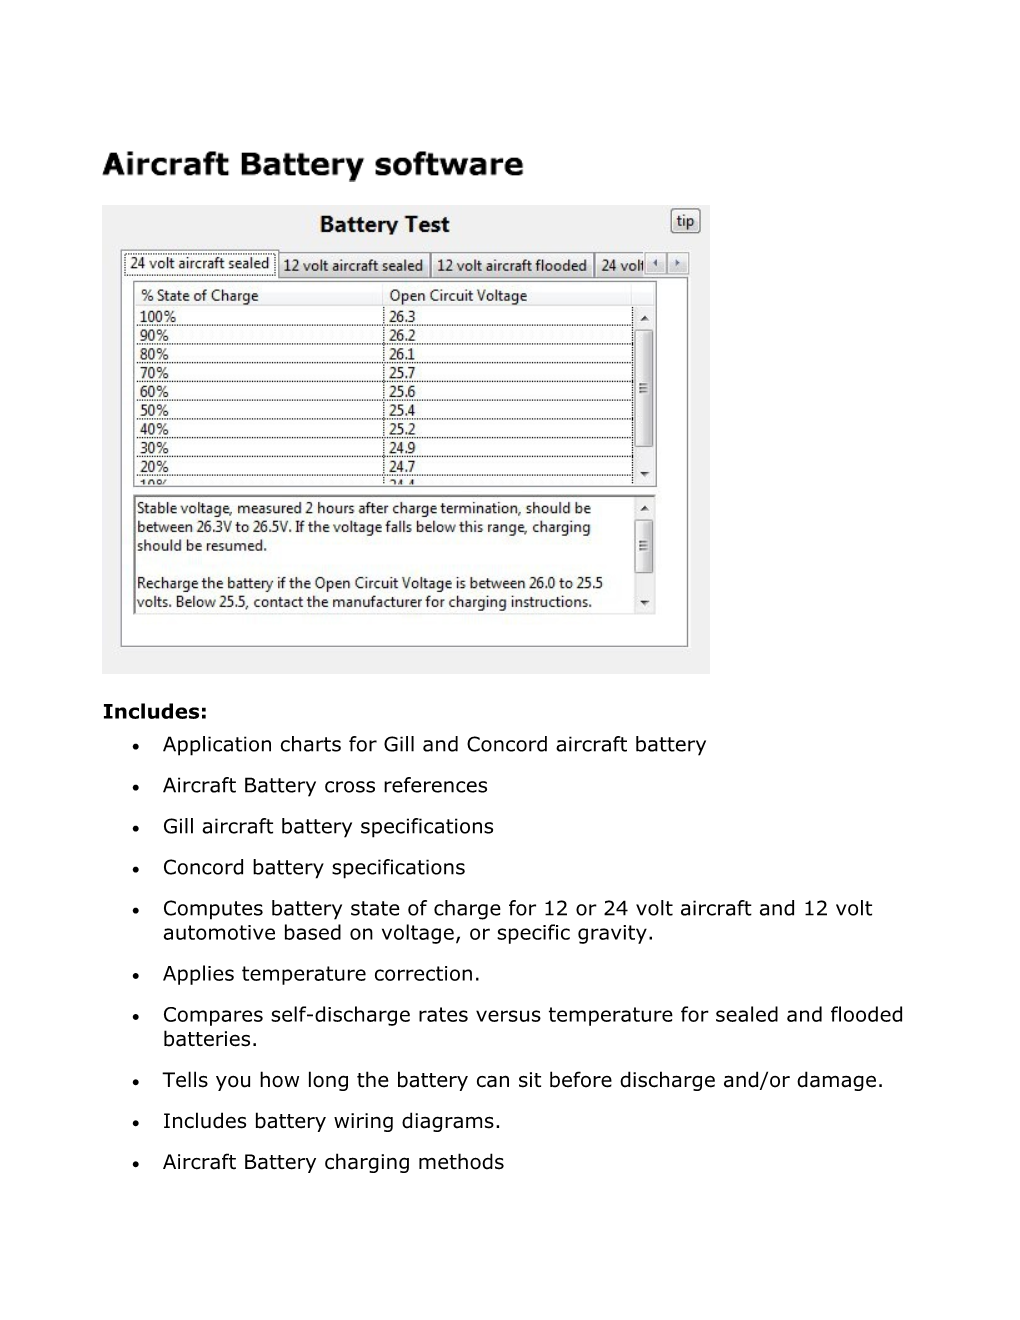 Application Charts for Gill and Concord Aircraft Battery